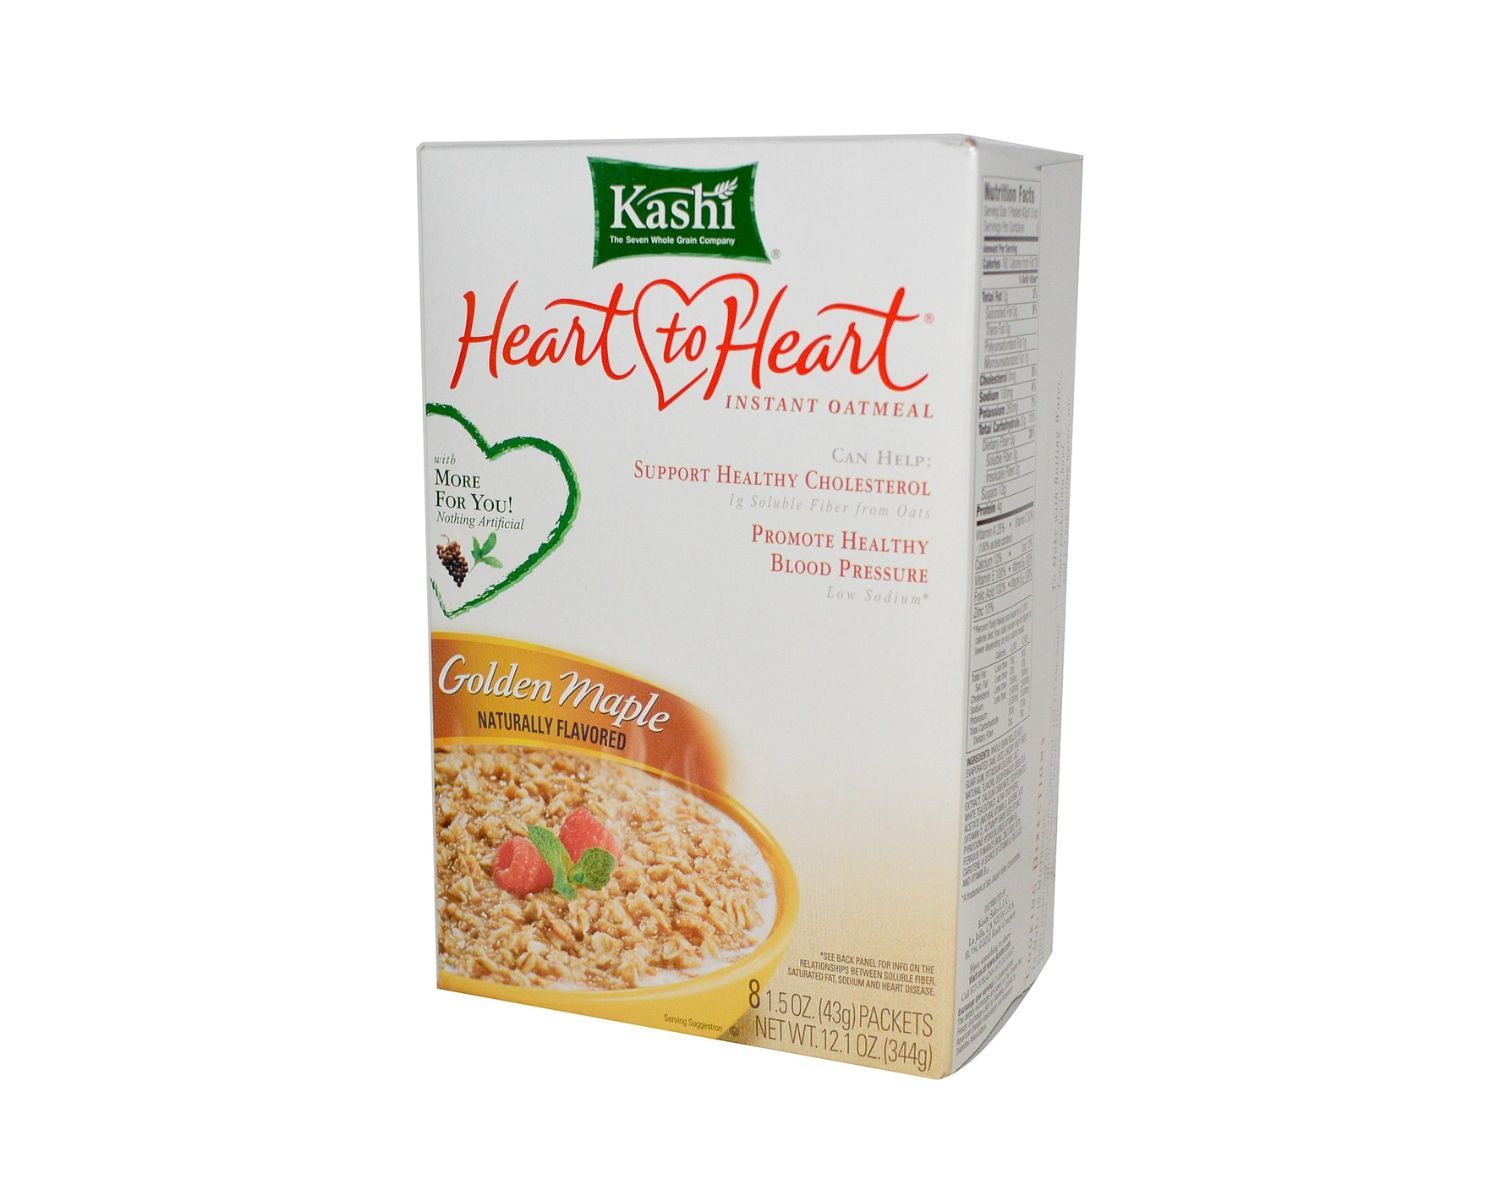 18-kashi-instant-oatmeal-nutrition-facts